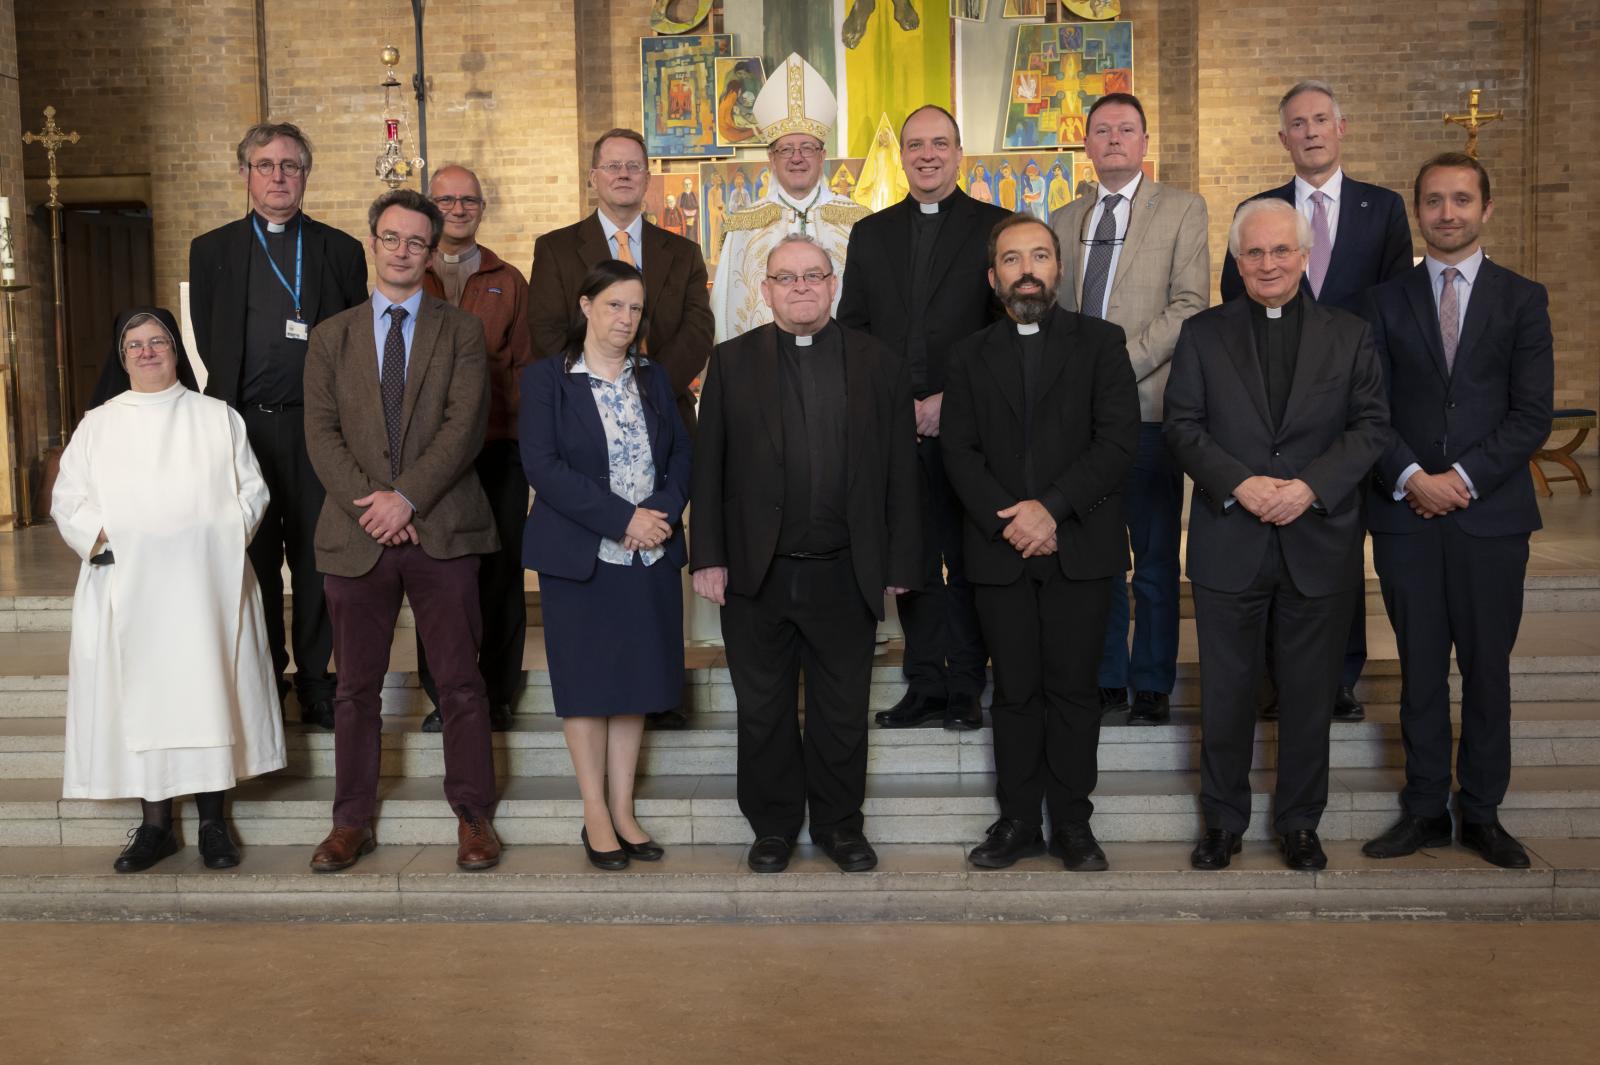 Teaching staff profess Faith and take Oath of Fidelity at Mater Ecclesiae College - Diocese of Westminster